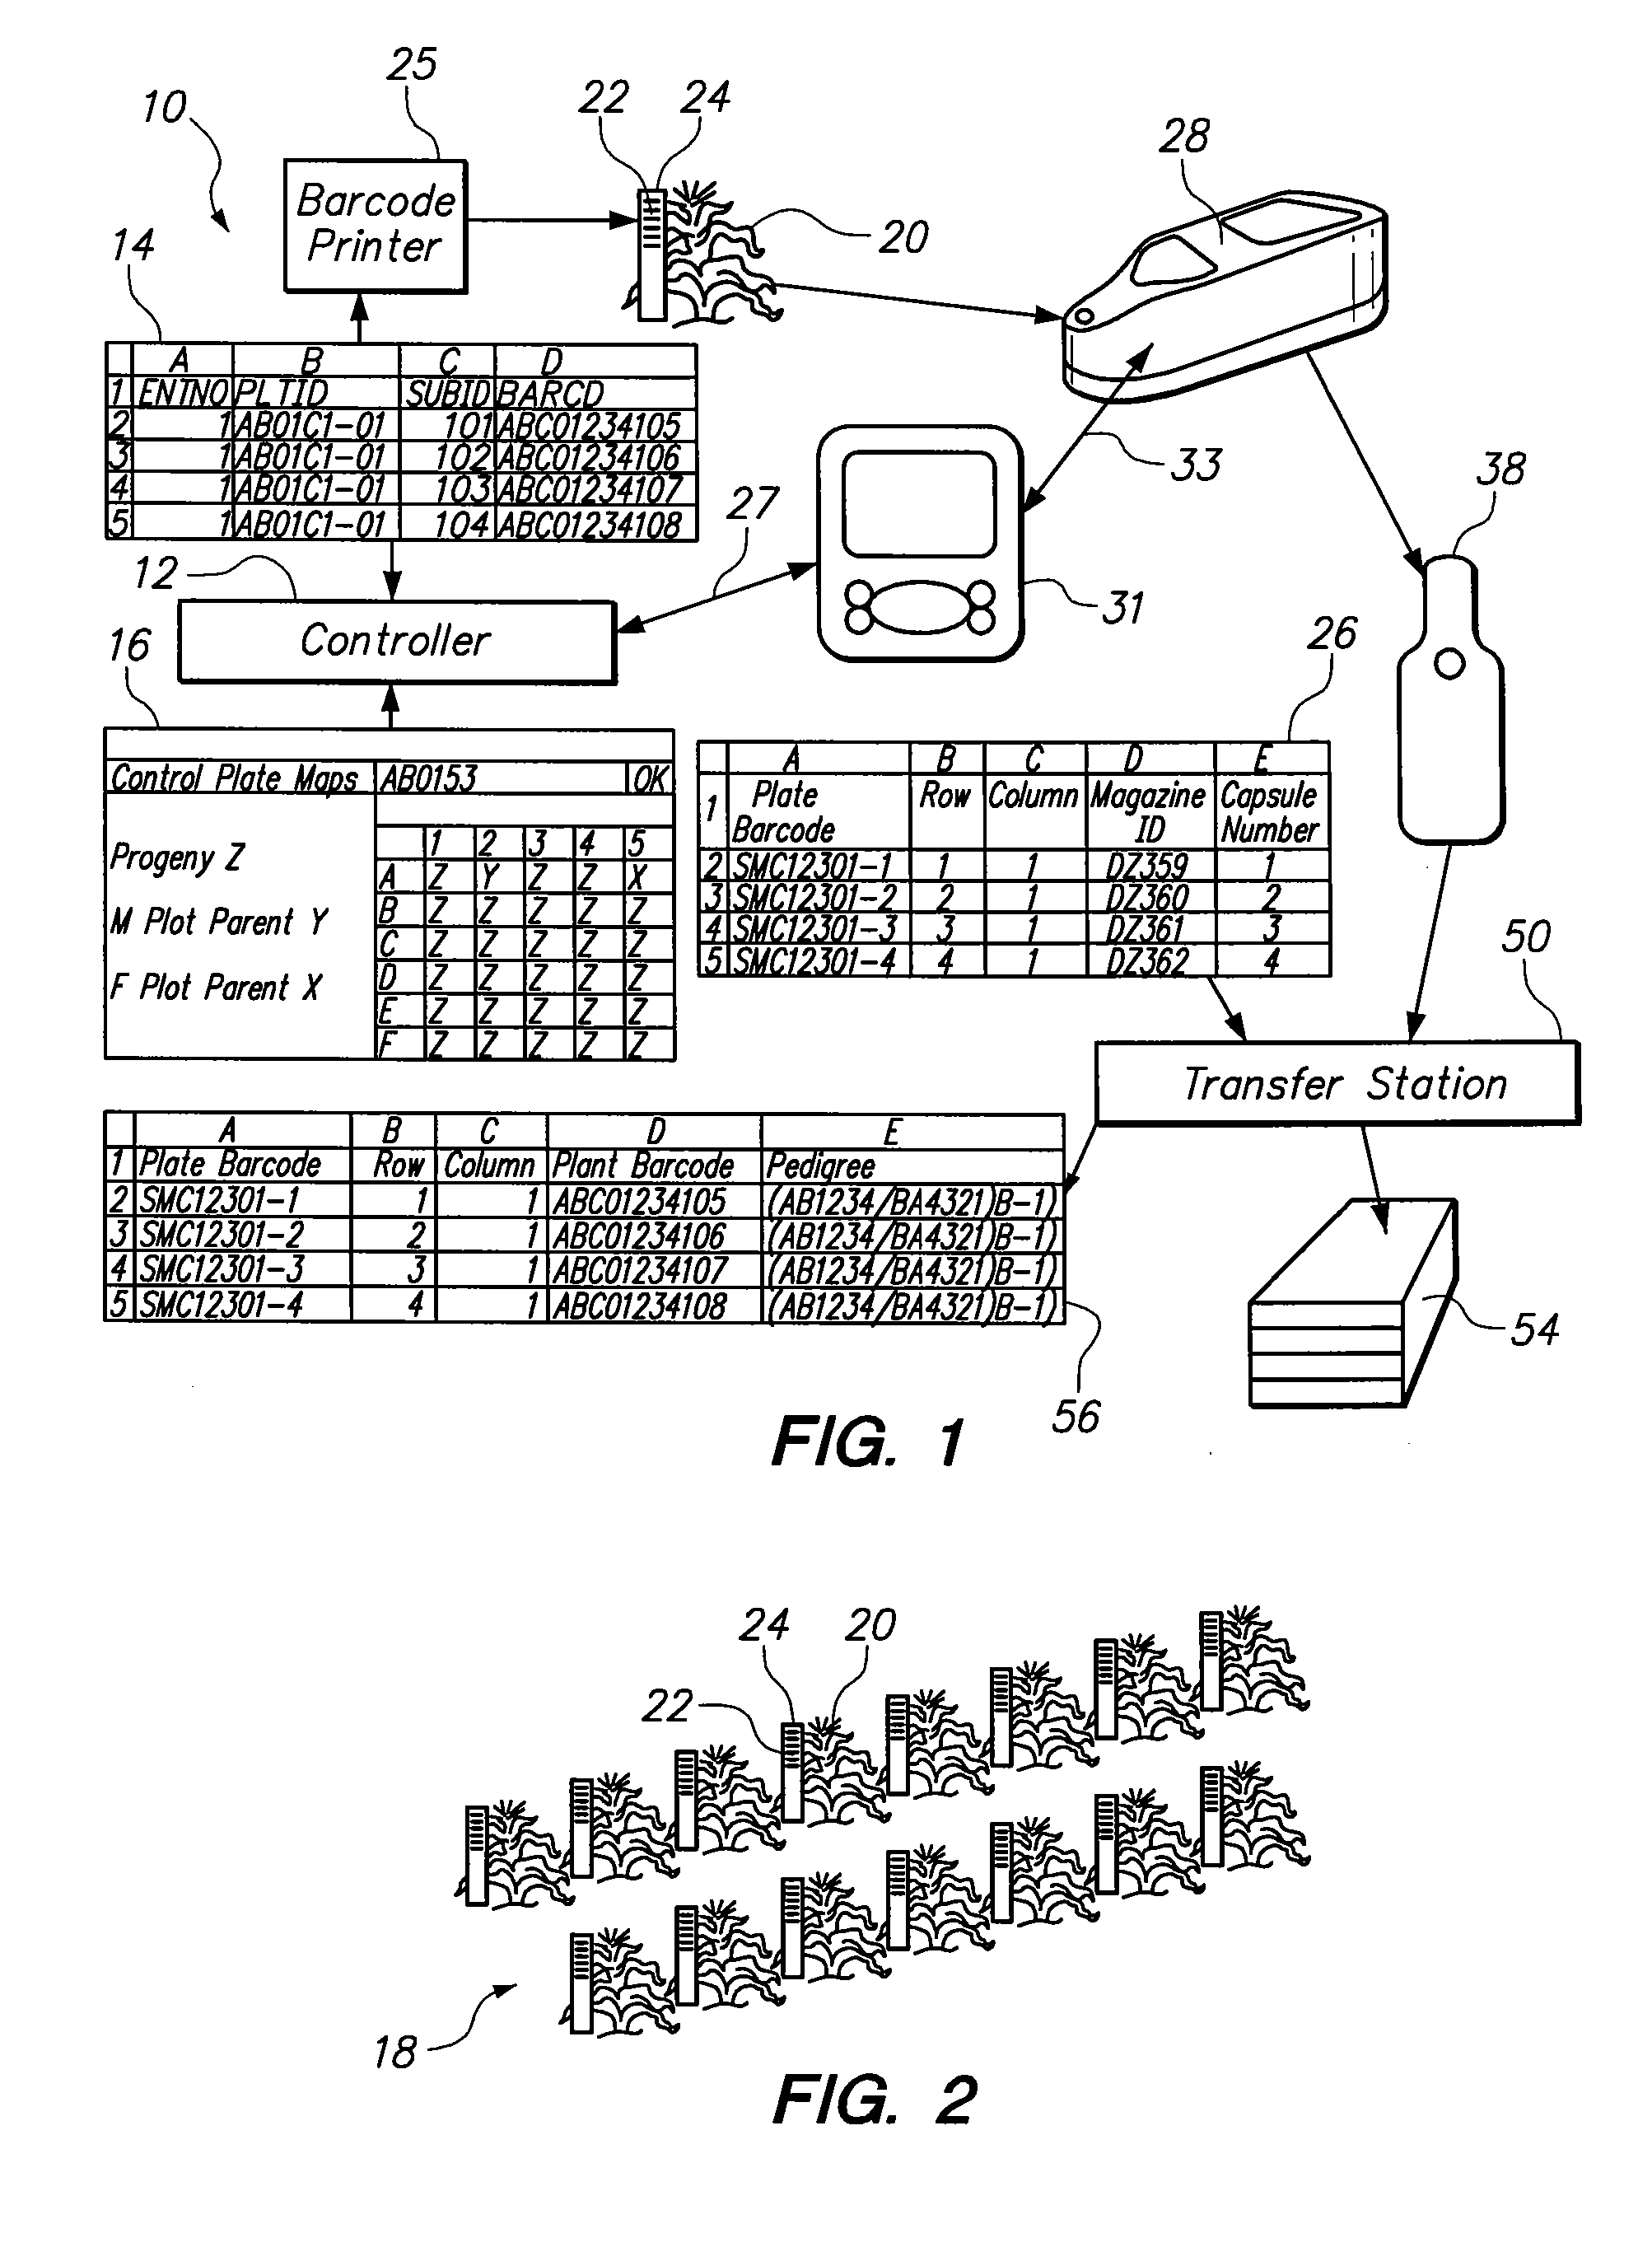 System for sampling and tracking plant material